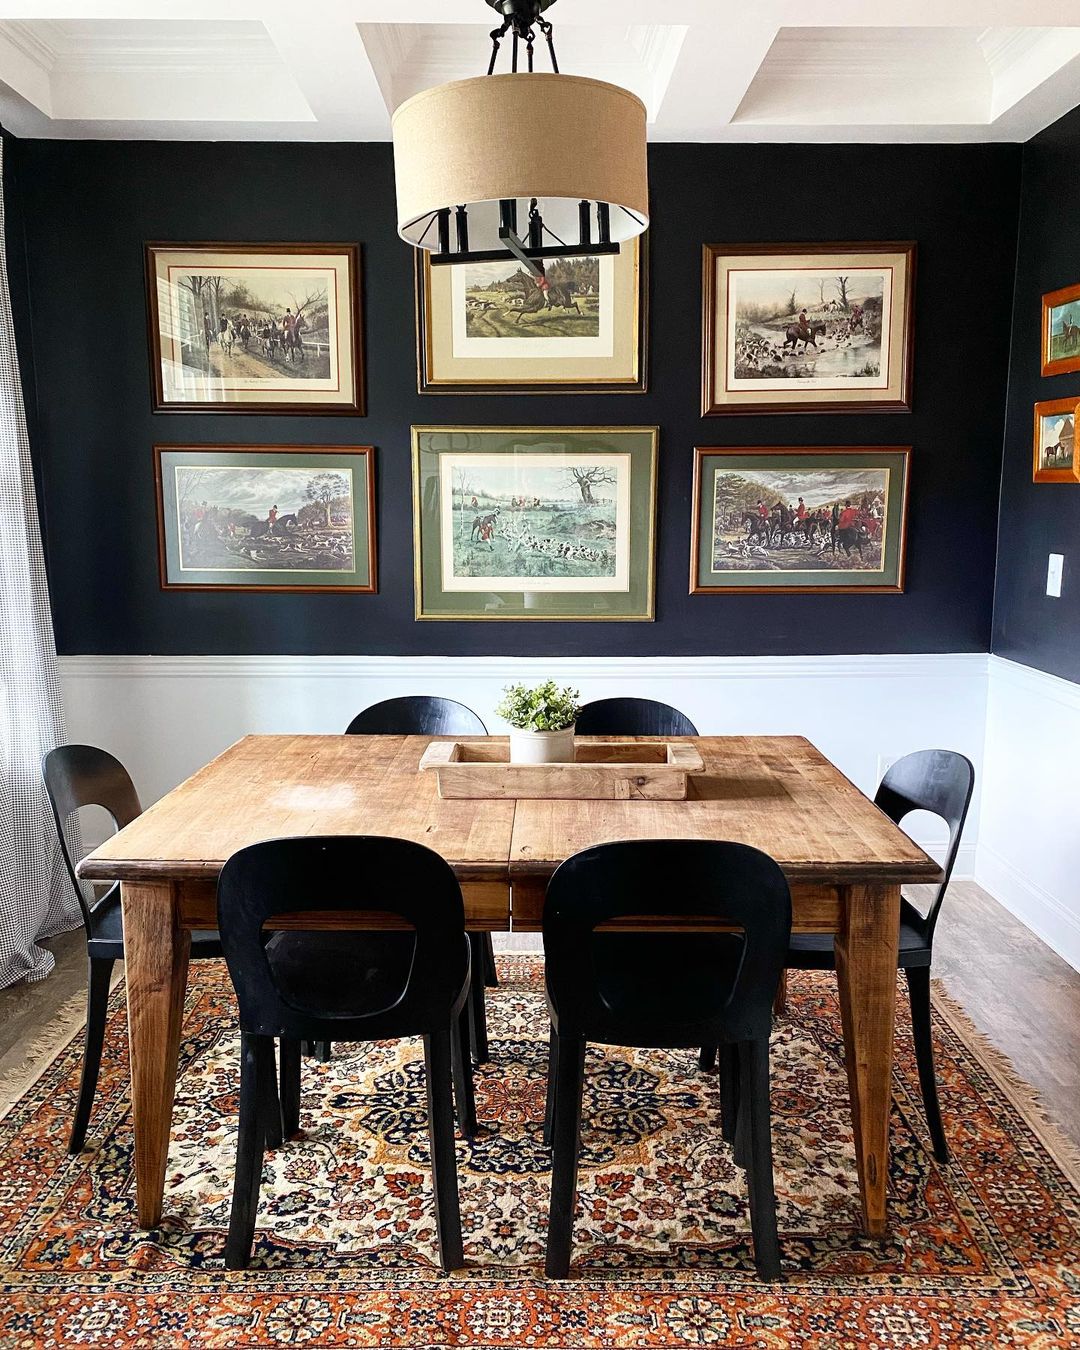 Dining room with black and white walls with black chairs around a square table and a gallery wall. Photo by instagram user @emilykayrichardson